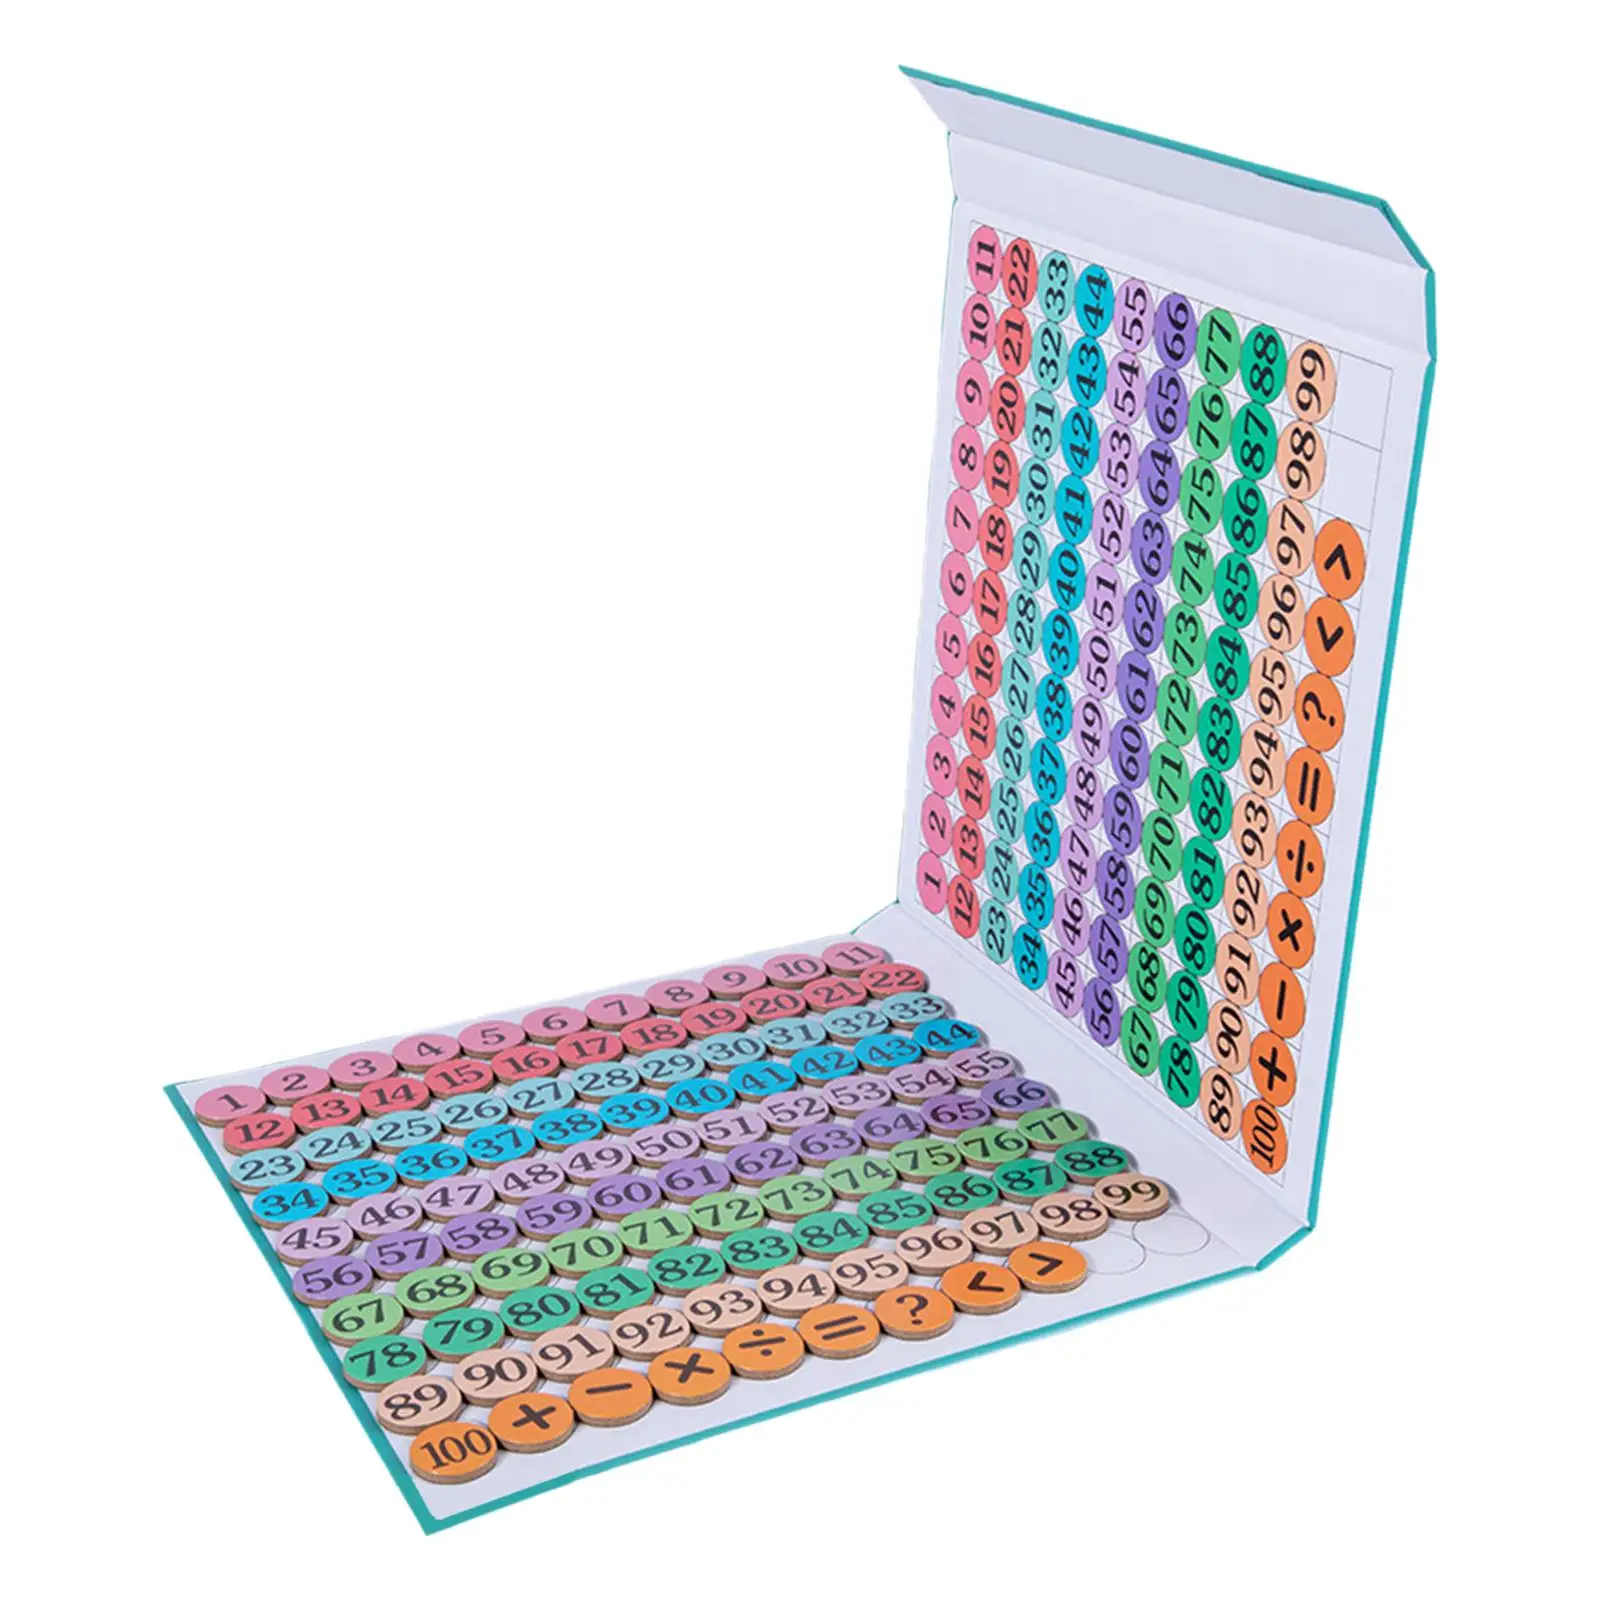 1-100 Hundred Number Board Development Toys Teaching Aids Party Favors Birthday Gift Multipurpose for Kindergarten Toddlers